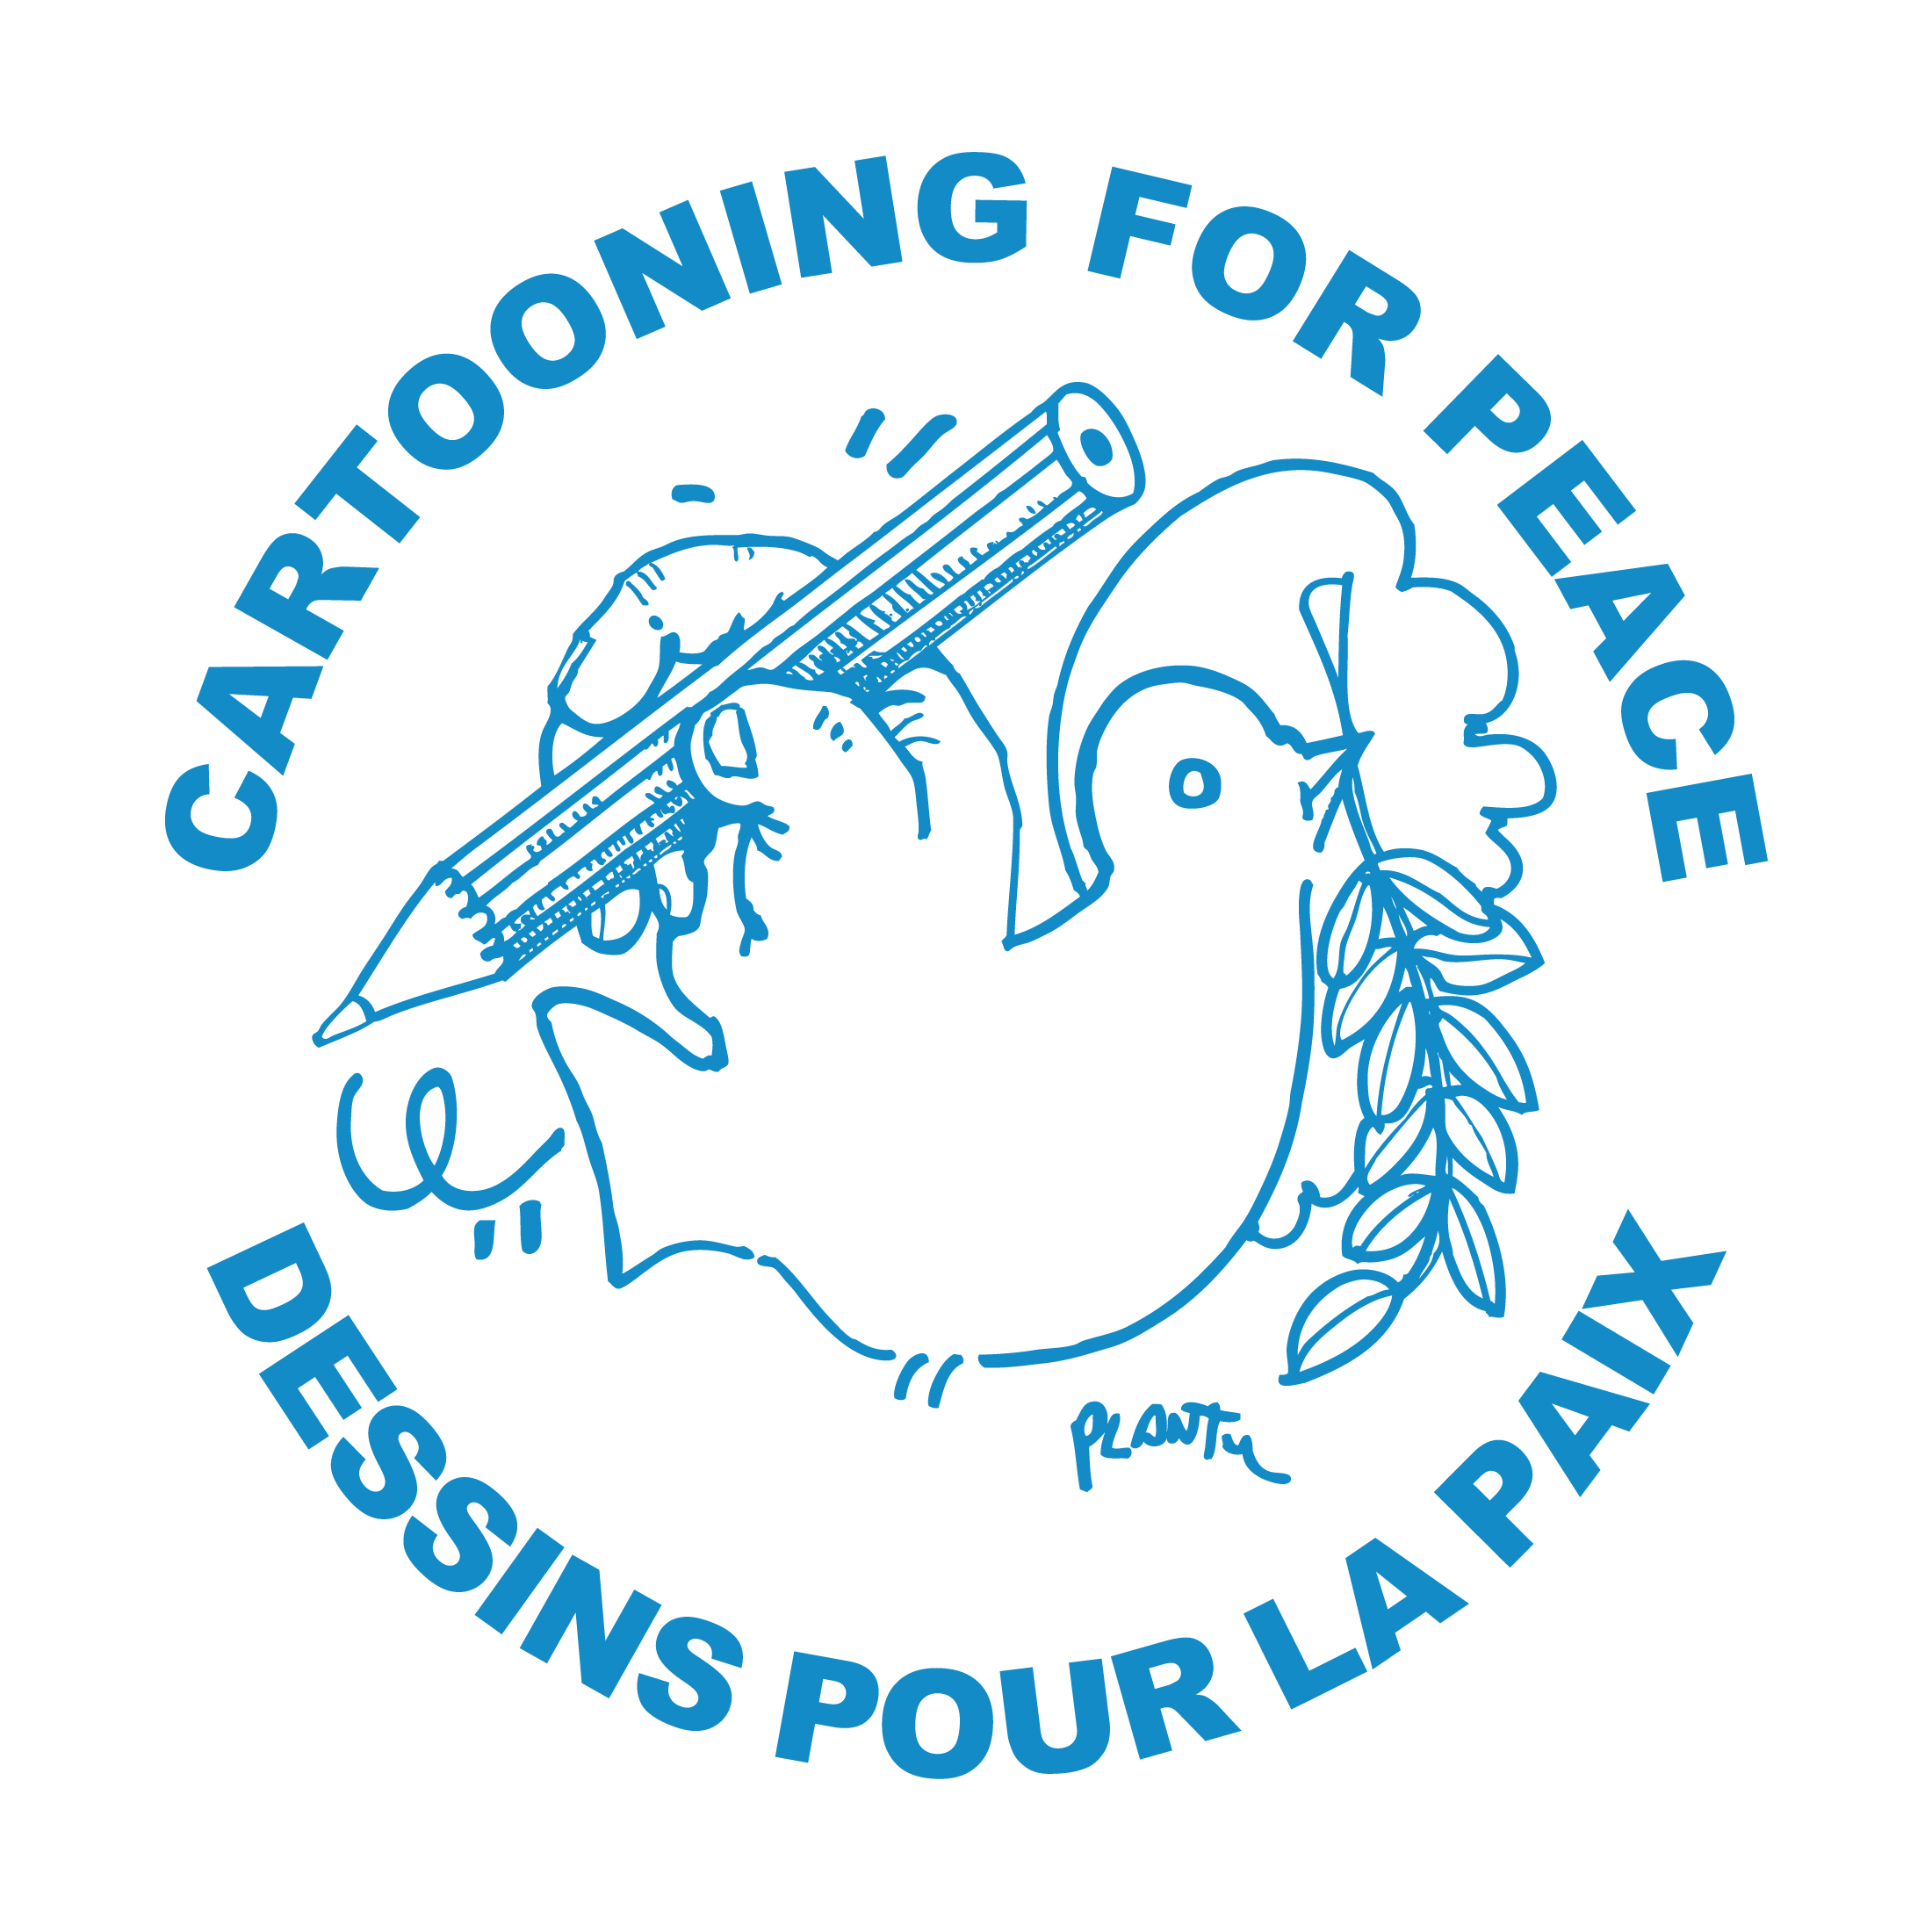 Cartooning for peace